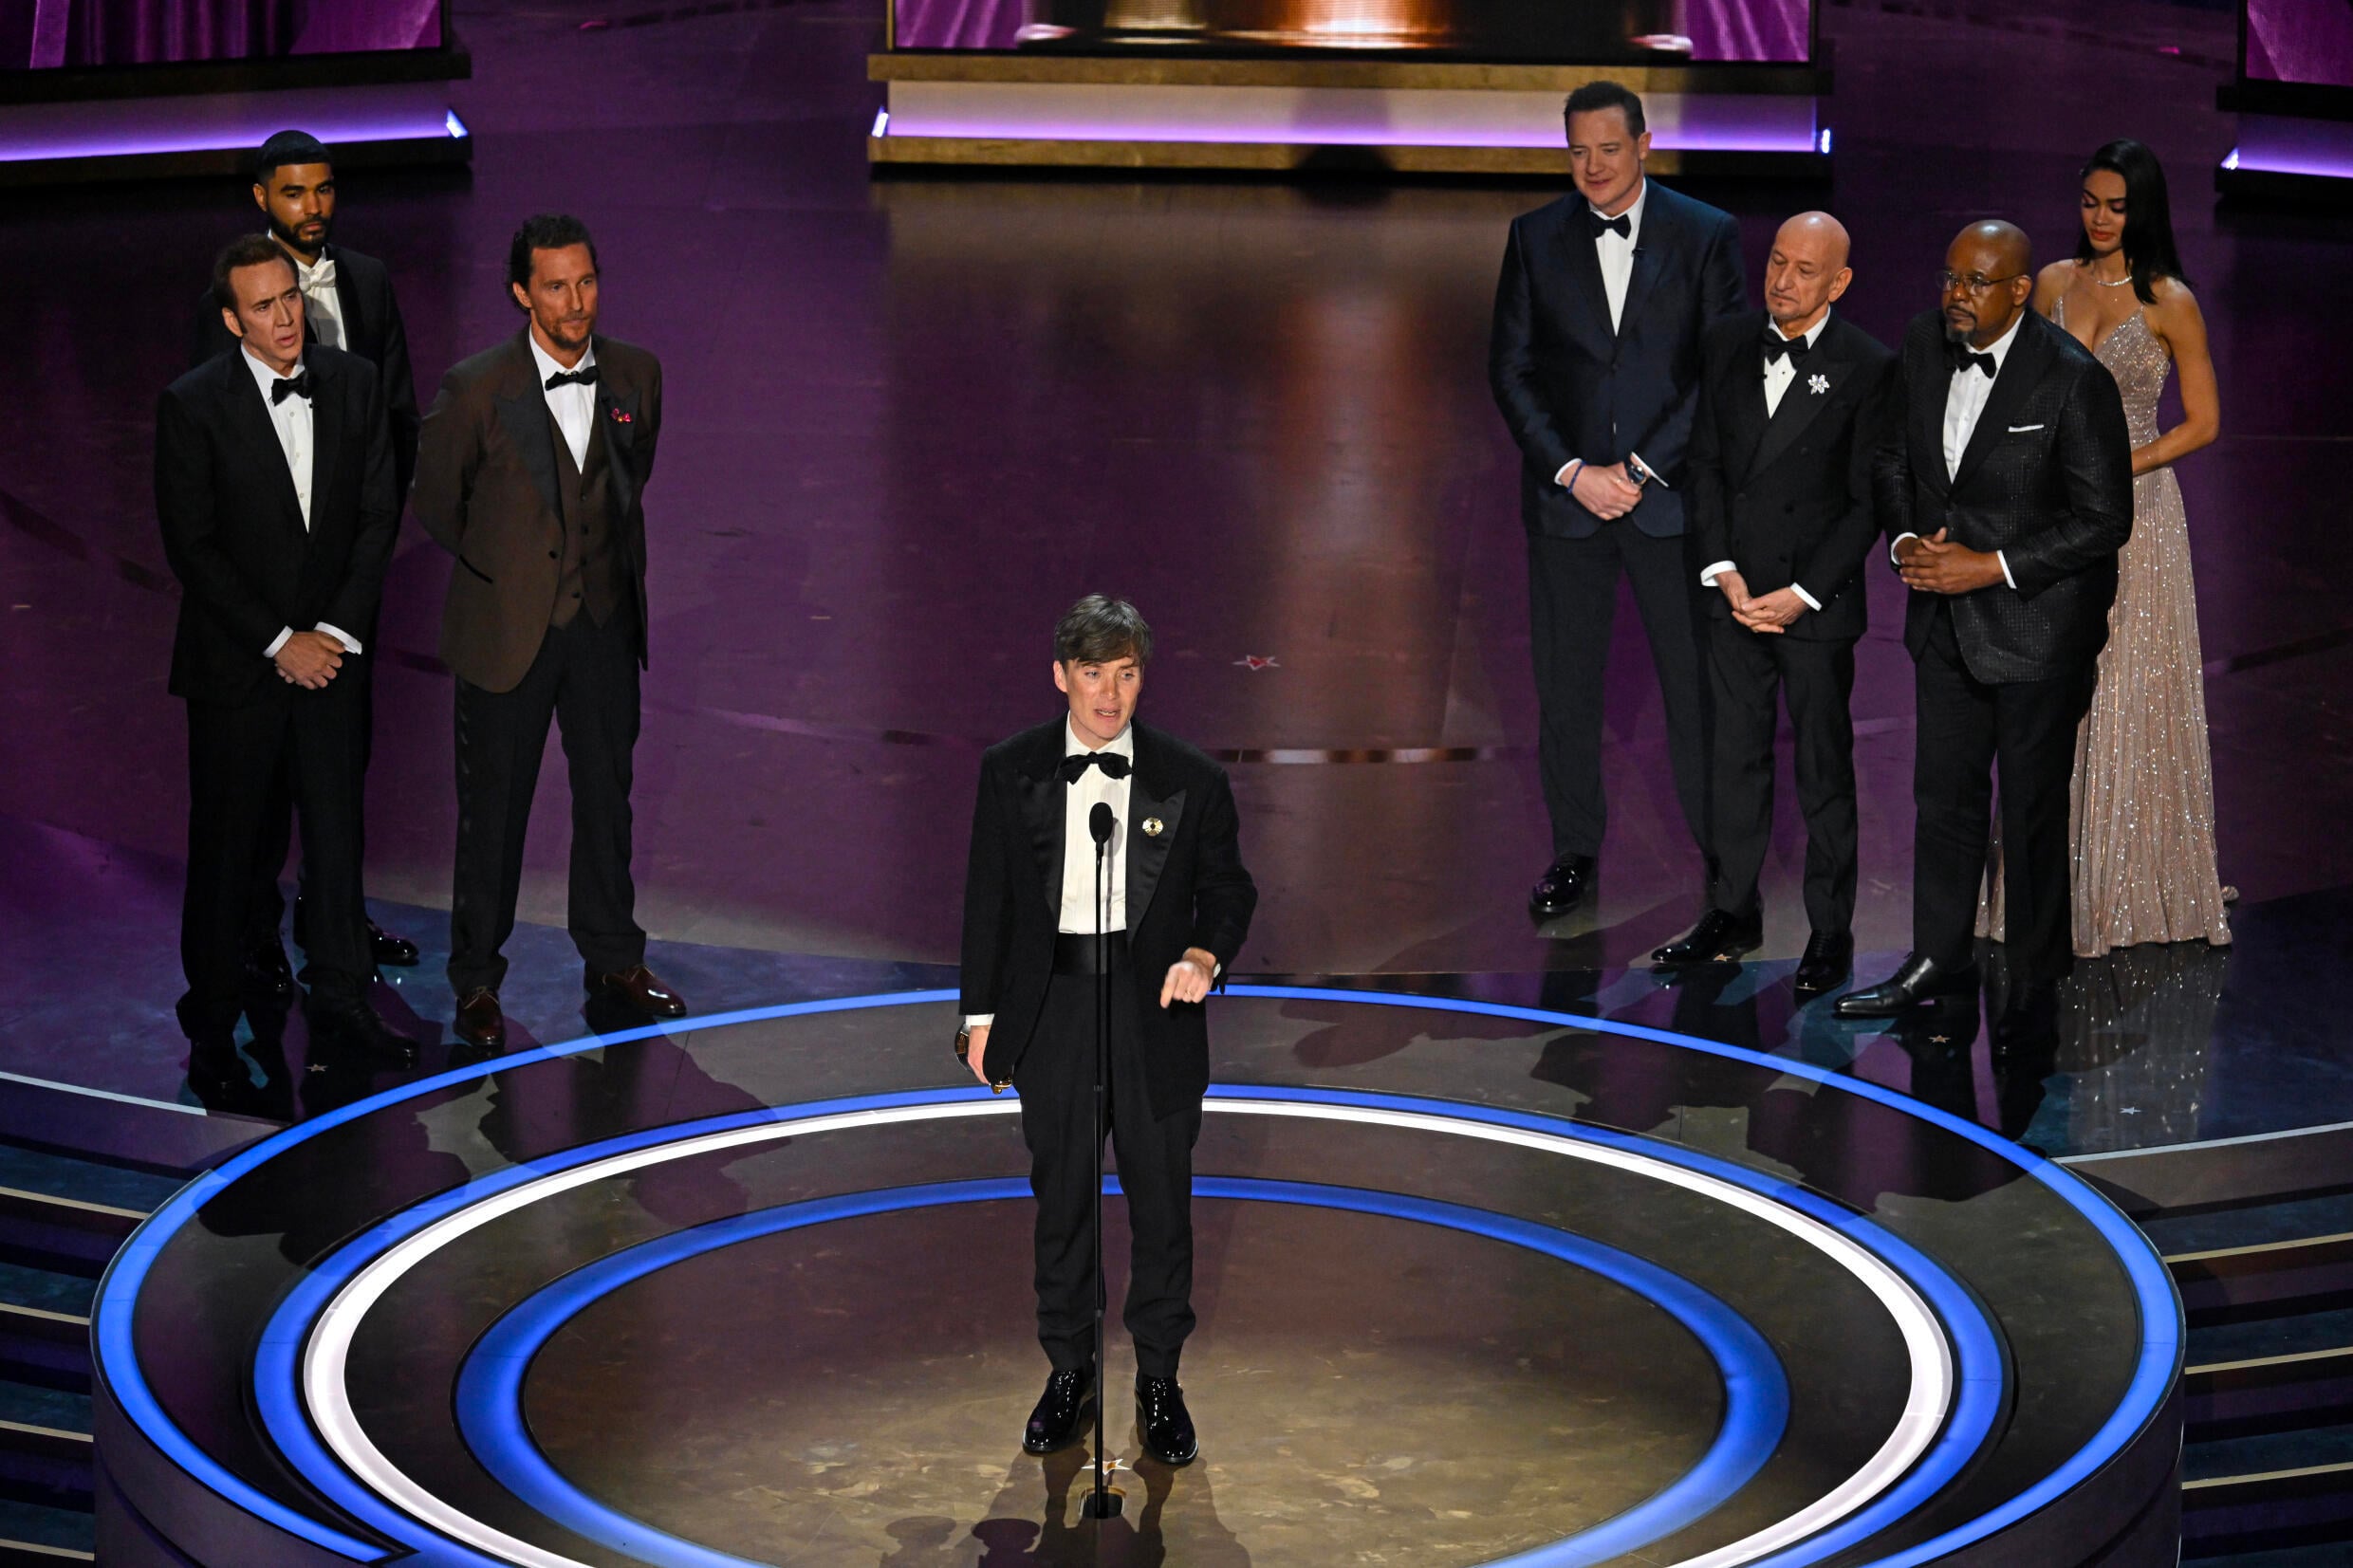 Irish actor Cillian Murphy won an Oscar for his portrayal of J. Robert Oppenheimer, flanked by (from back L) past winners Nicolas Cage, Matthew McConaughey, Brendan Fraser, Ben Kingsley and Forest Whitaker. Photo: AFP